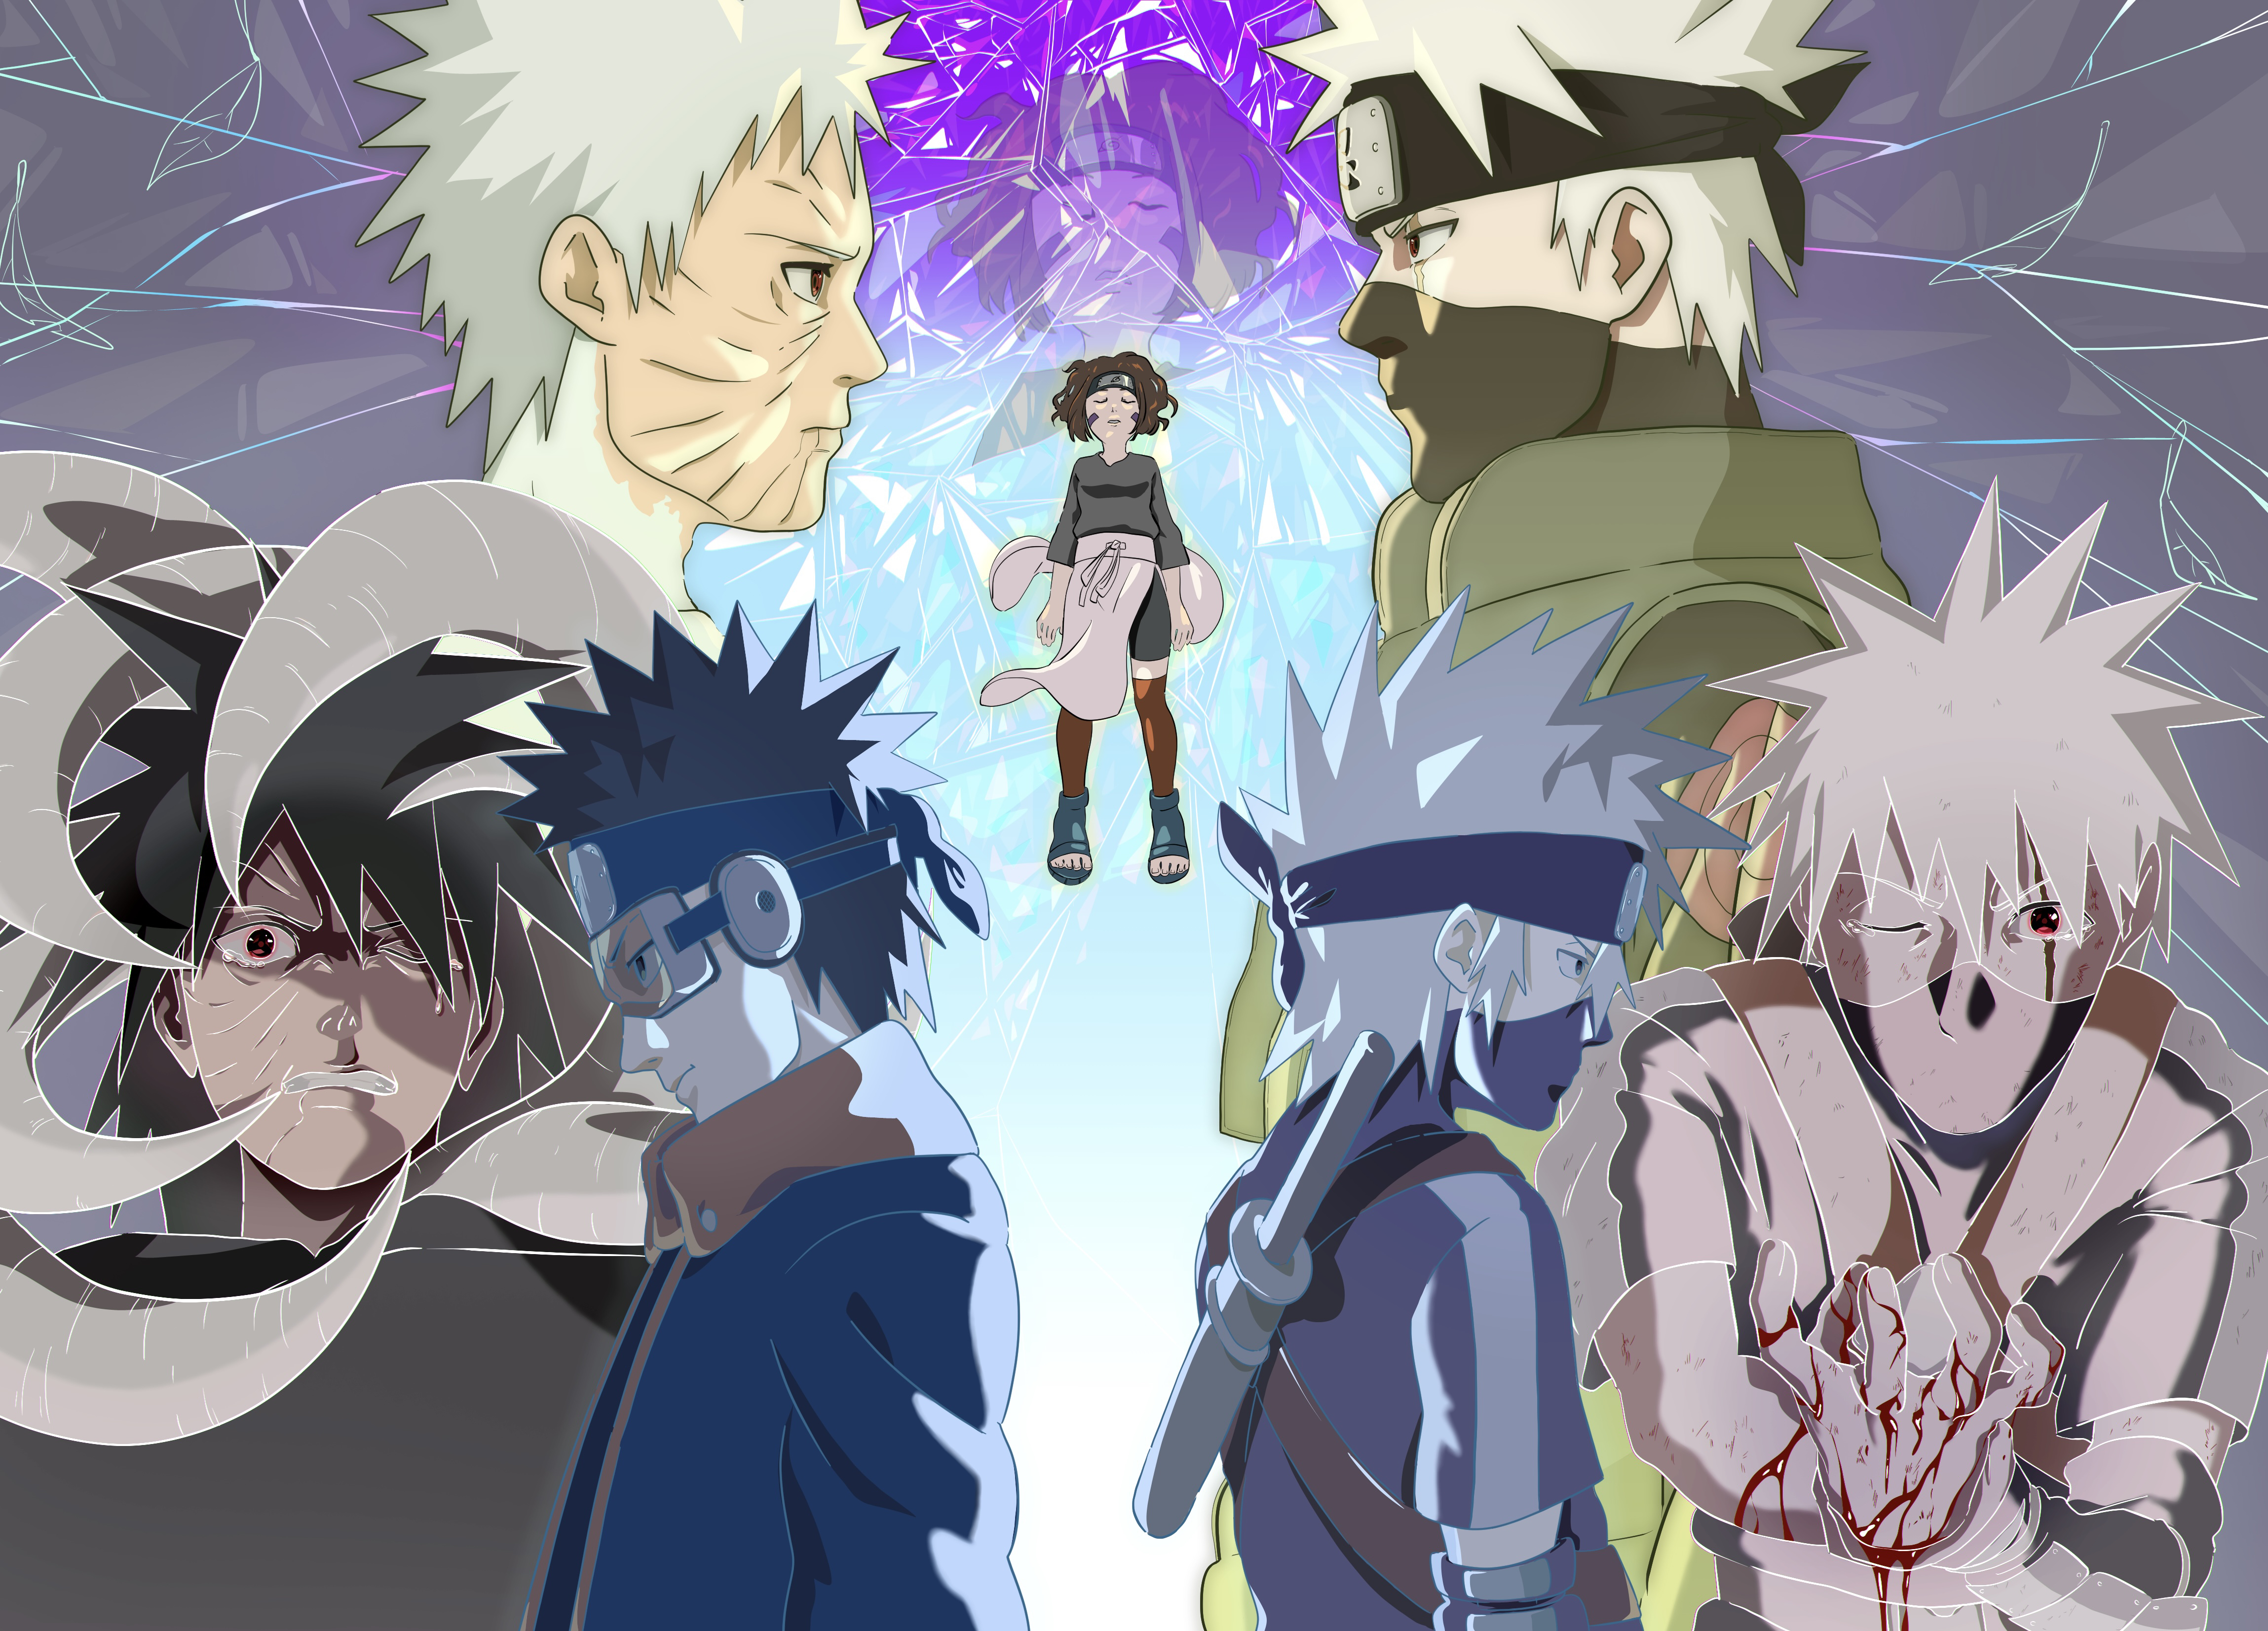 Obito And Kakashi iPhone Wallpapers - Wallpaper Cave